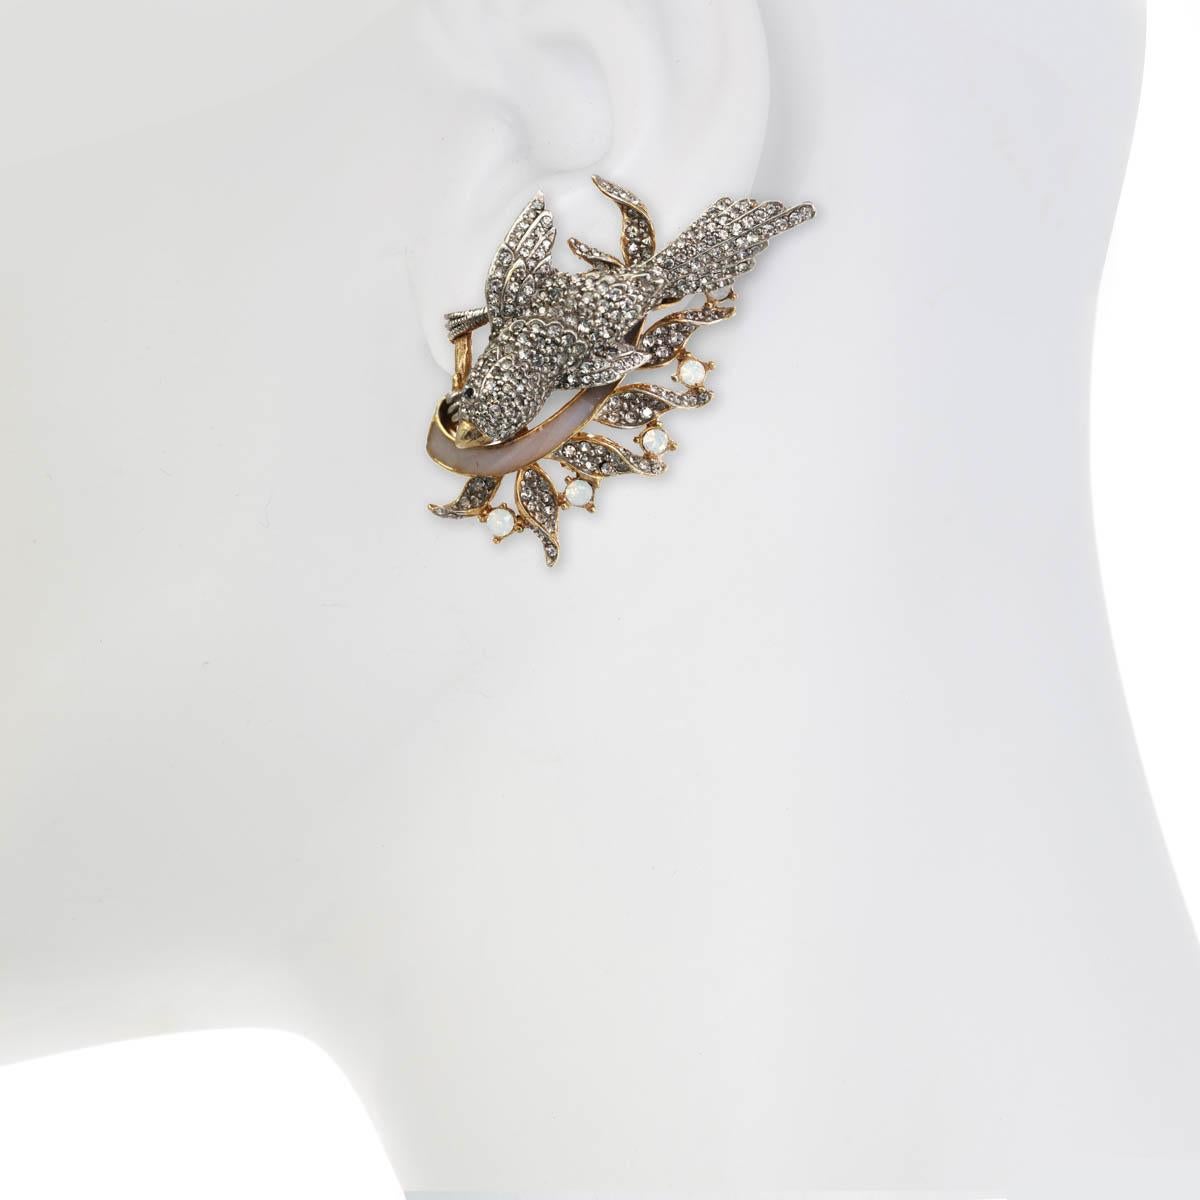 The Enchanting Bird Earring, from season I of the Ines x Ciner collaboration, is as sweet as can be with its beautiful rhinestone accents.

Materials: 
Pewter
18K Gold Plating
Genuine Rhodium Plating
Opal Enamel
Clip Back
Dimensions: 
Length: 2